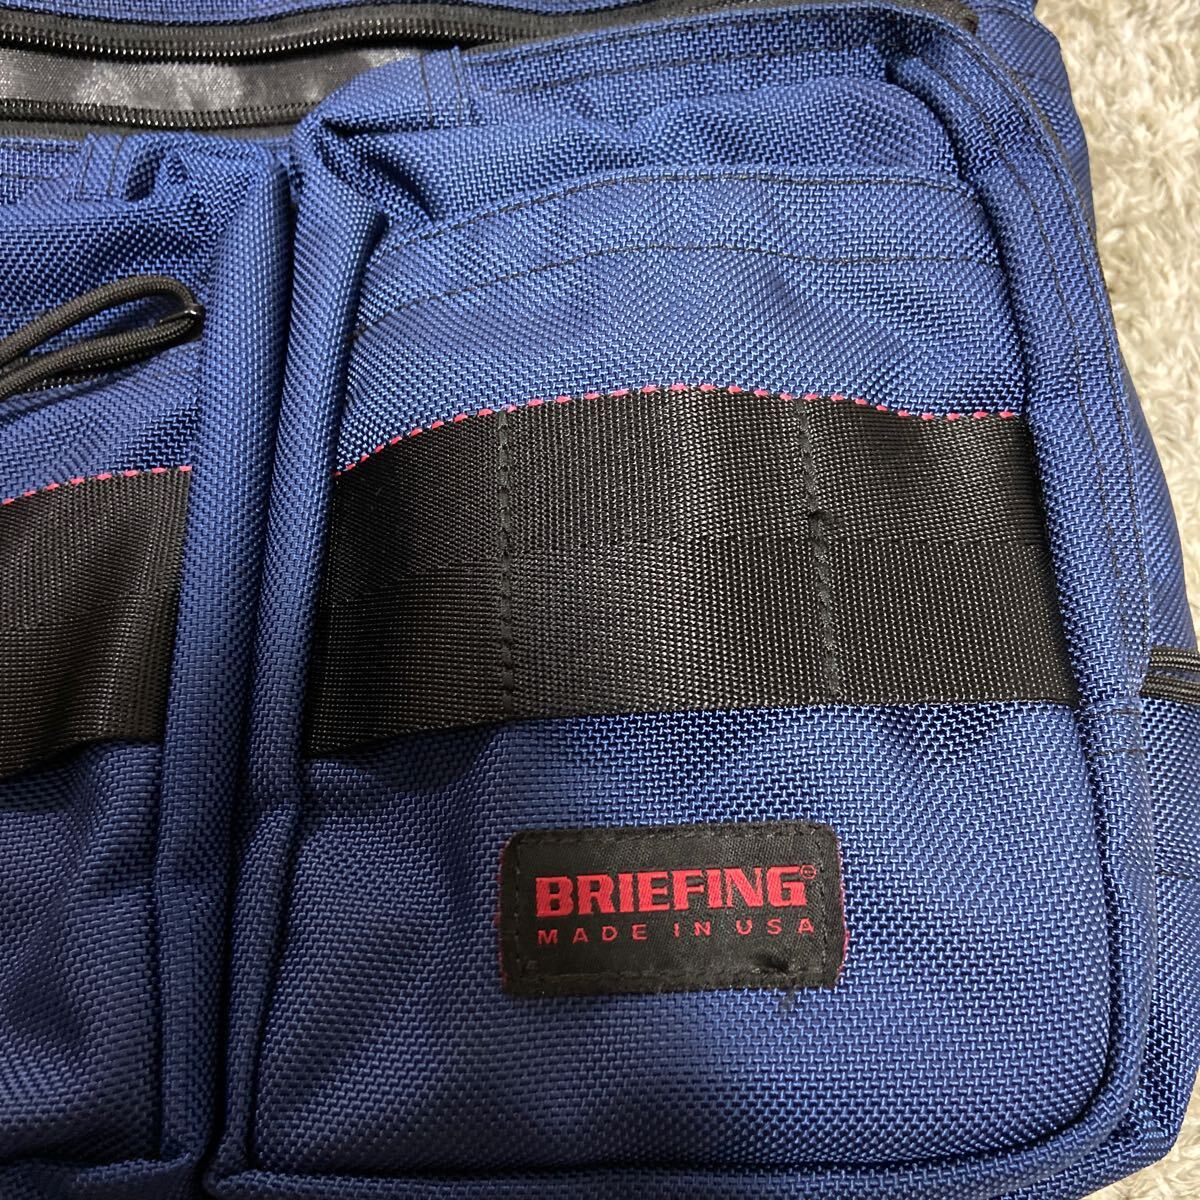 BRIEFING Briefing tote bag midnight America made business tote bag BS TOTE WIDE